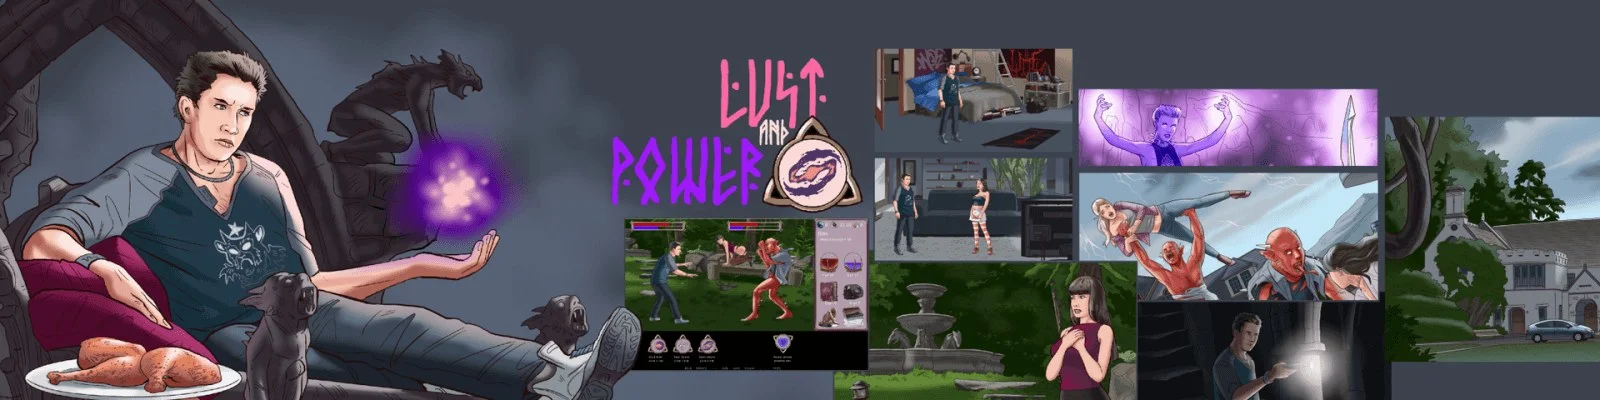 Lust and Power Lurking Hedgehog Adult xxx Game Download